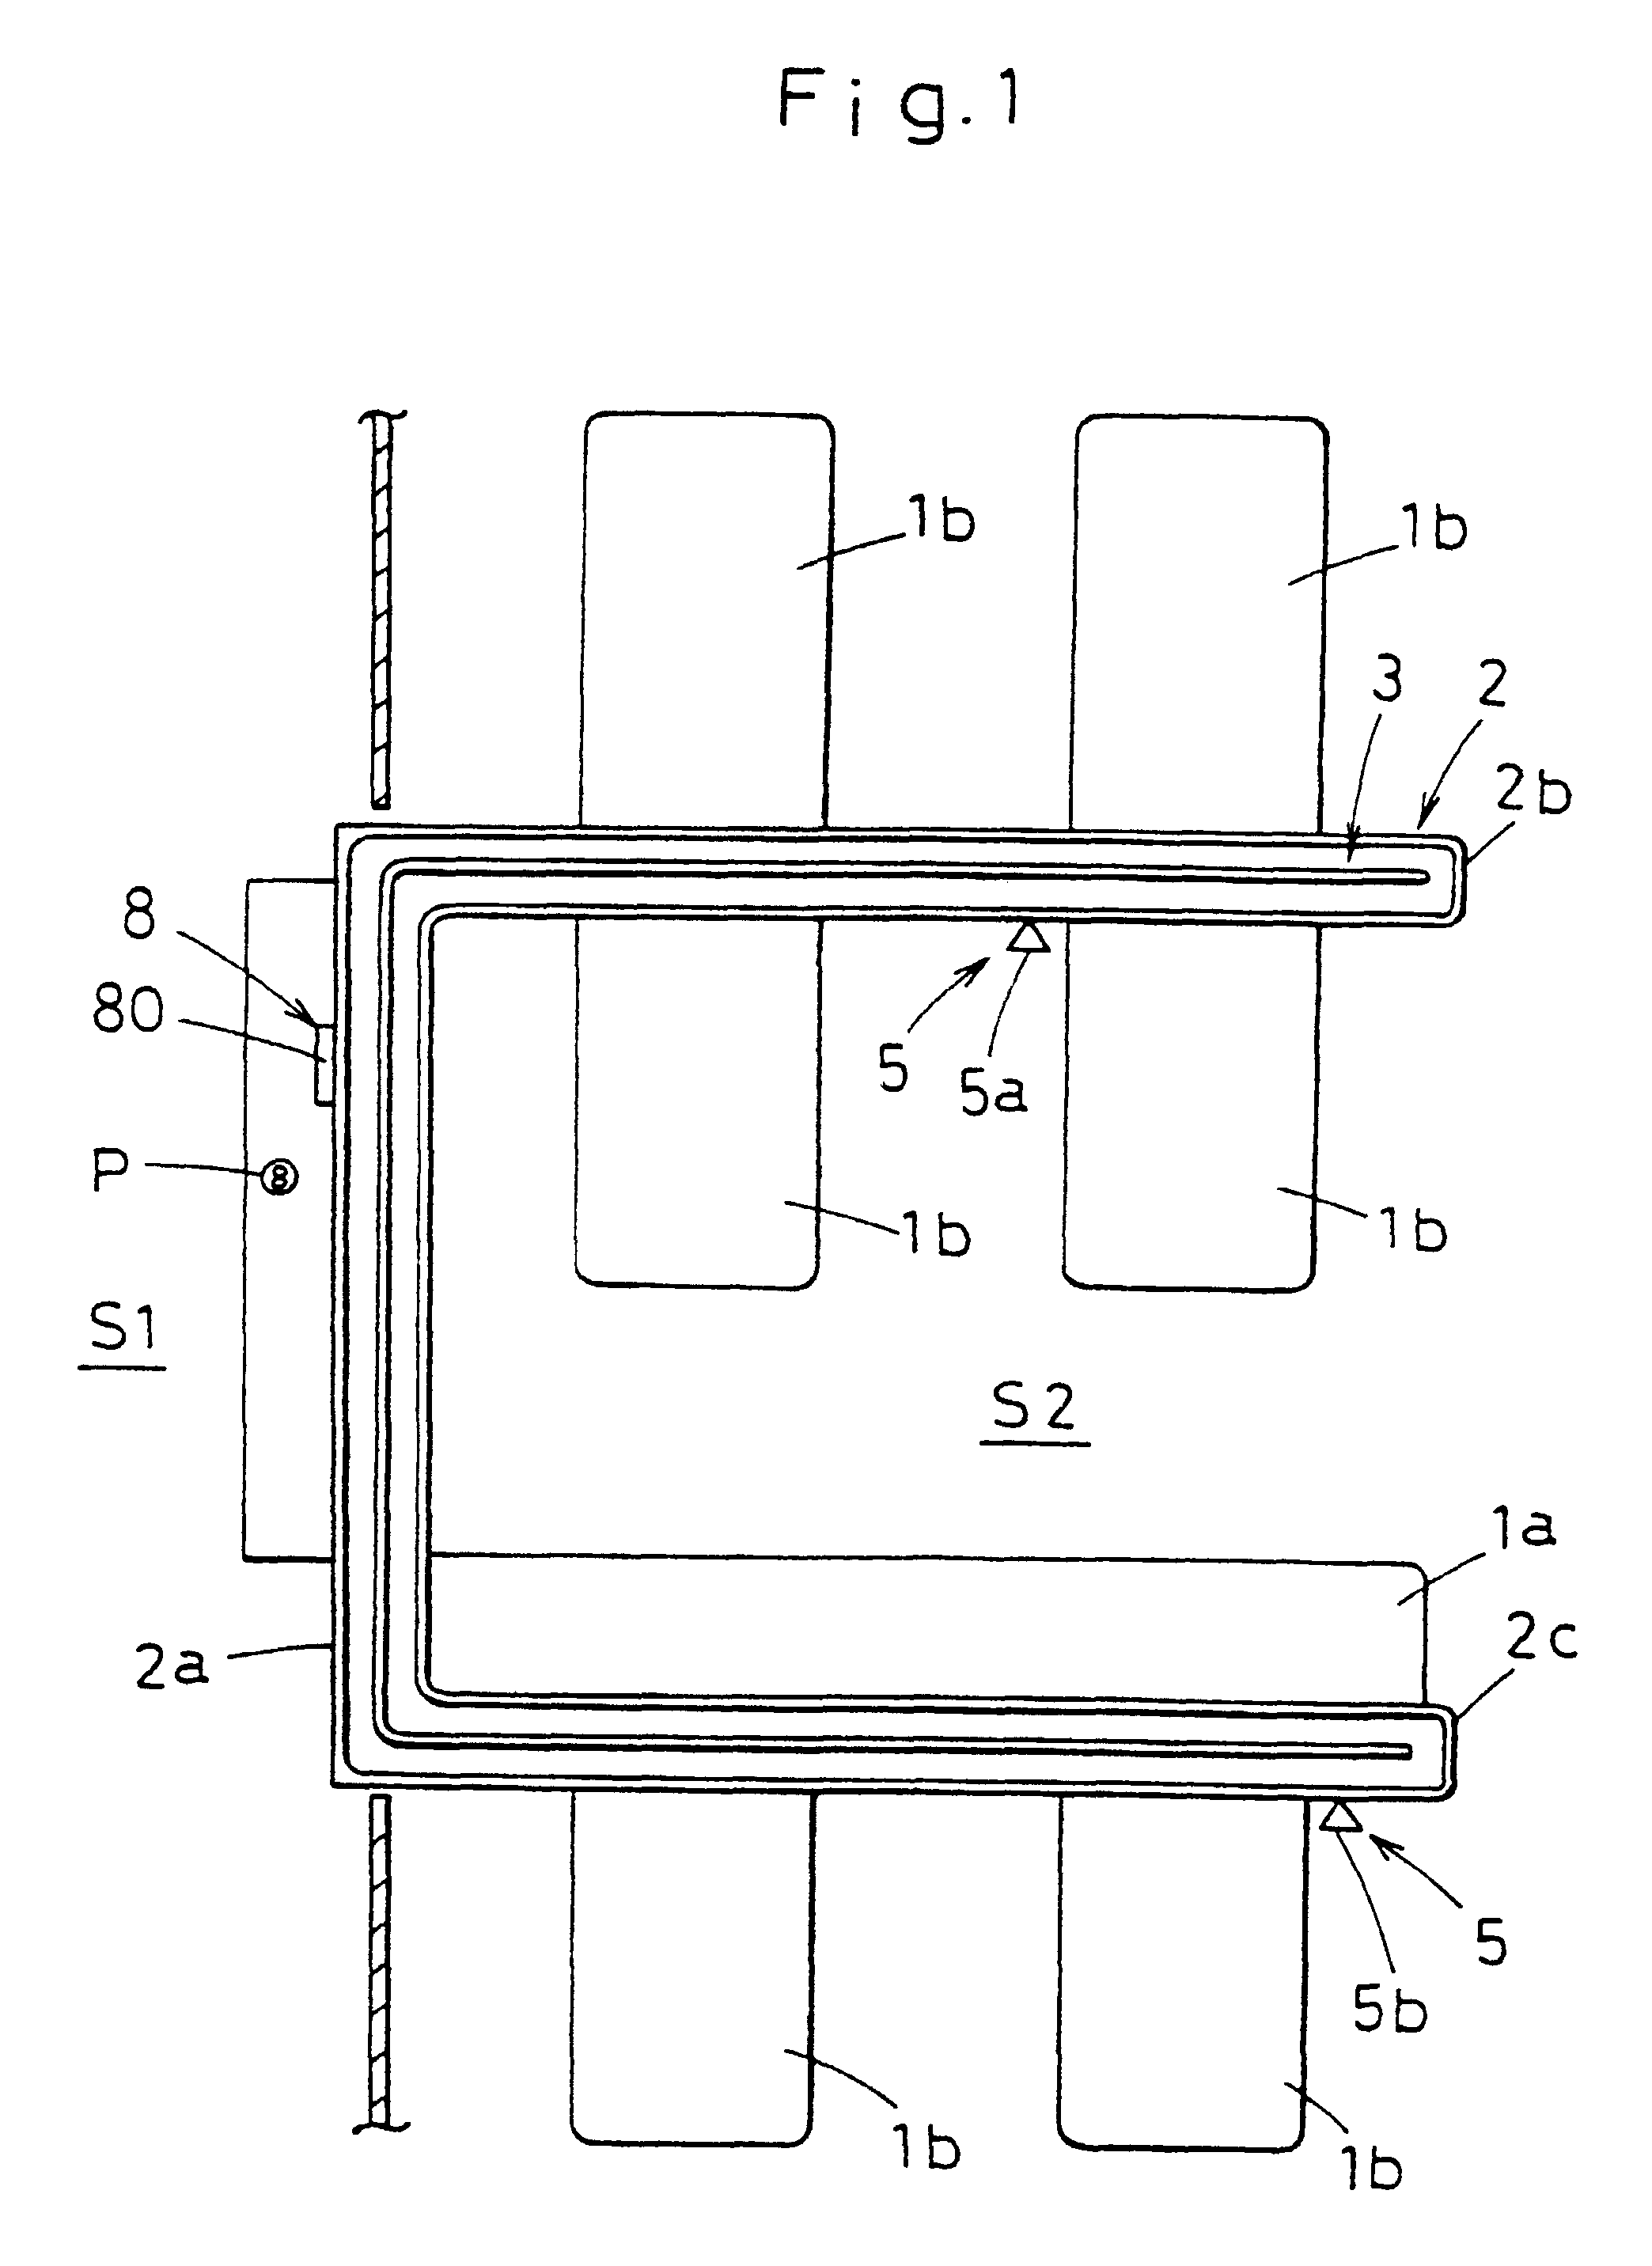 Food and drink conveying system